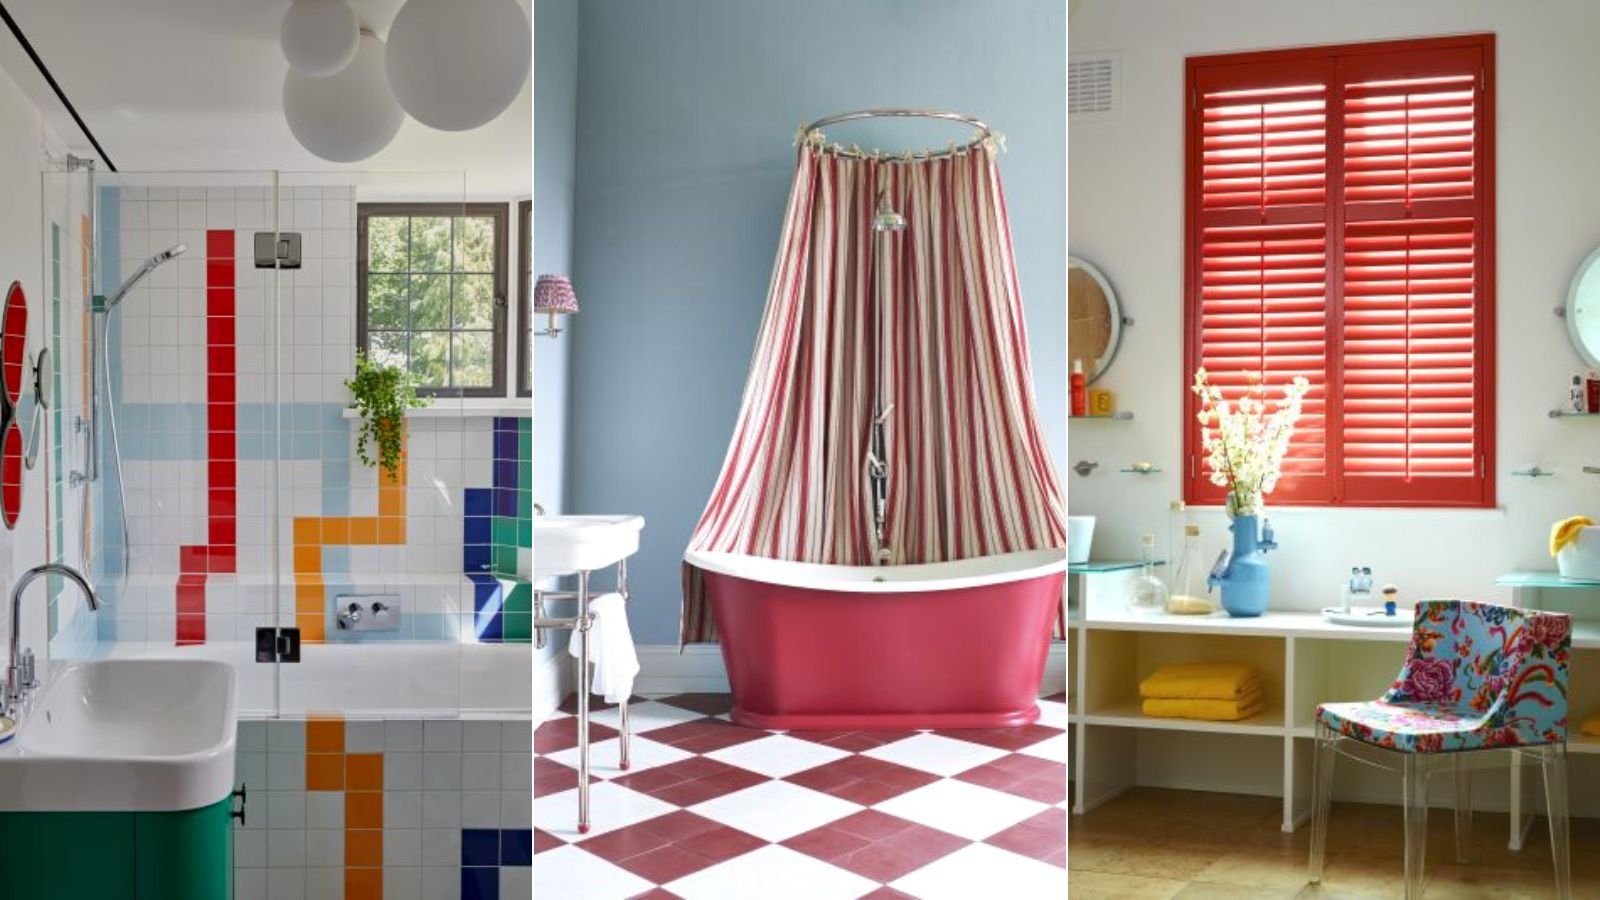 10 bathrooms your kids would love  toronto designers